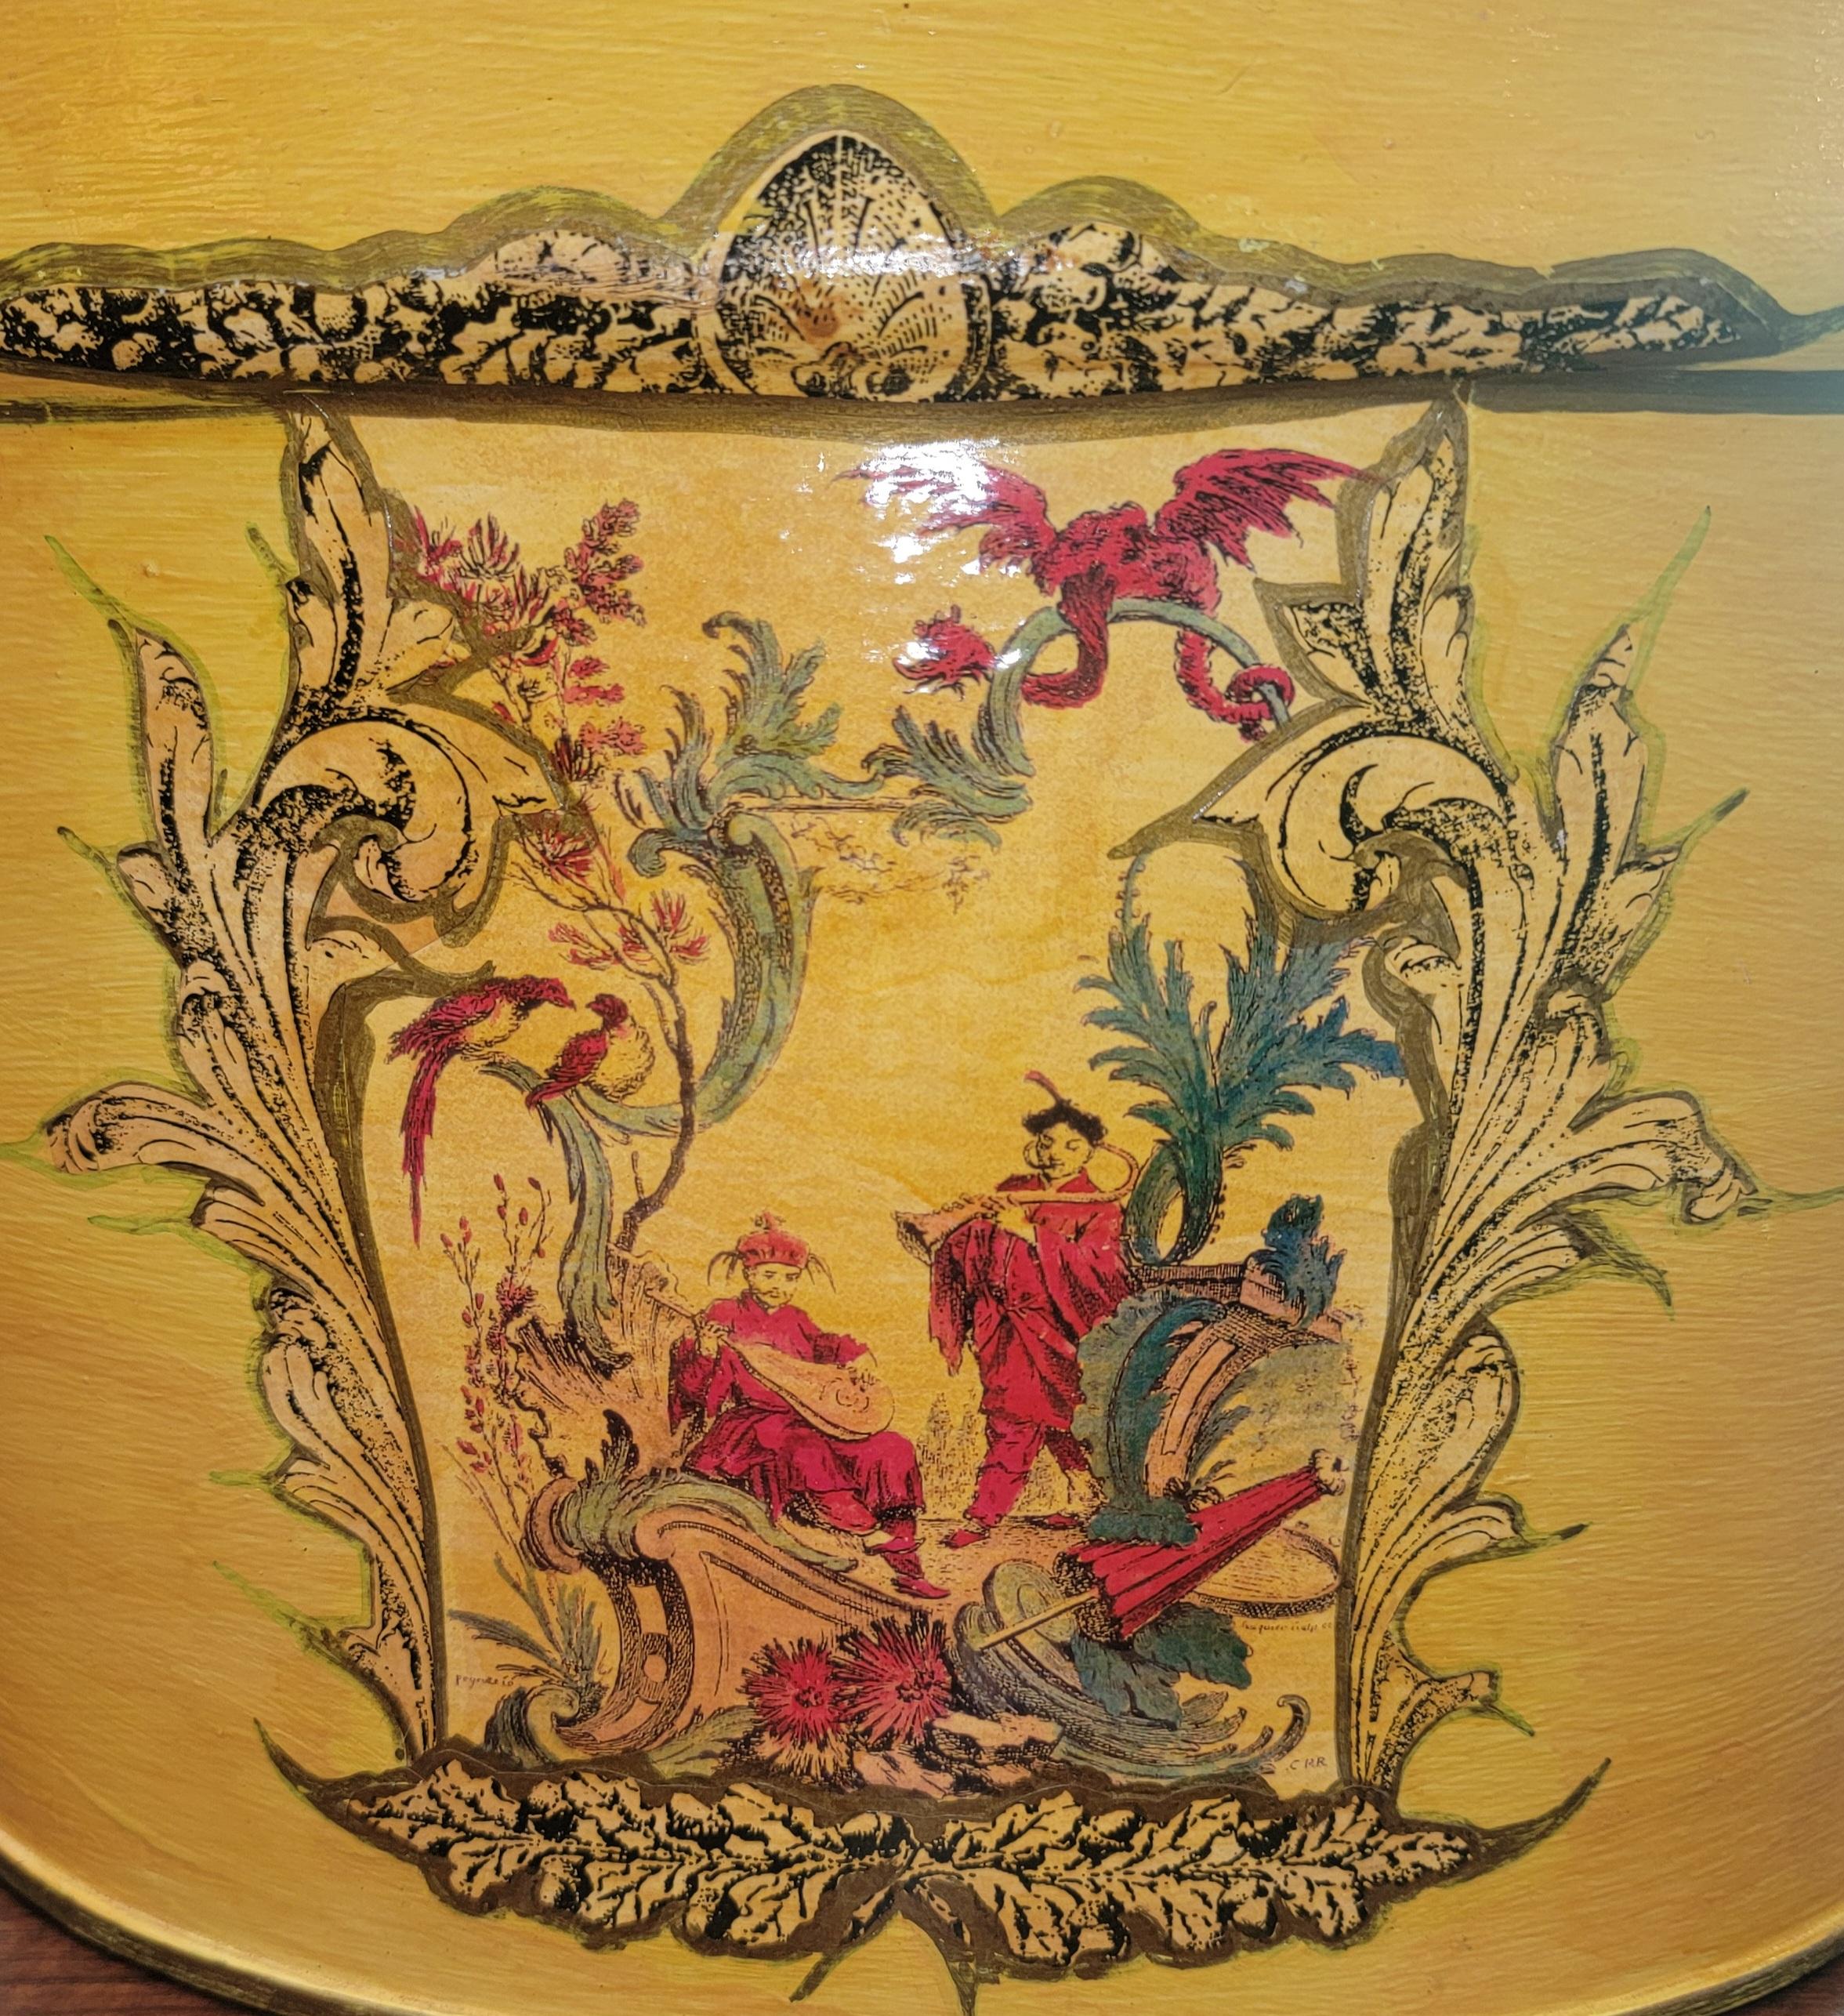 Wonderful painted metal and iron handle bucket. The front sides and back have a chinoiserie styled design. the colors are attractive and pop with the contrasting background.

Bucket measures approx - 16w x 10h x 10d 
when handle is down.

When